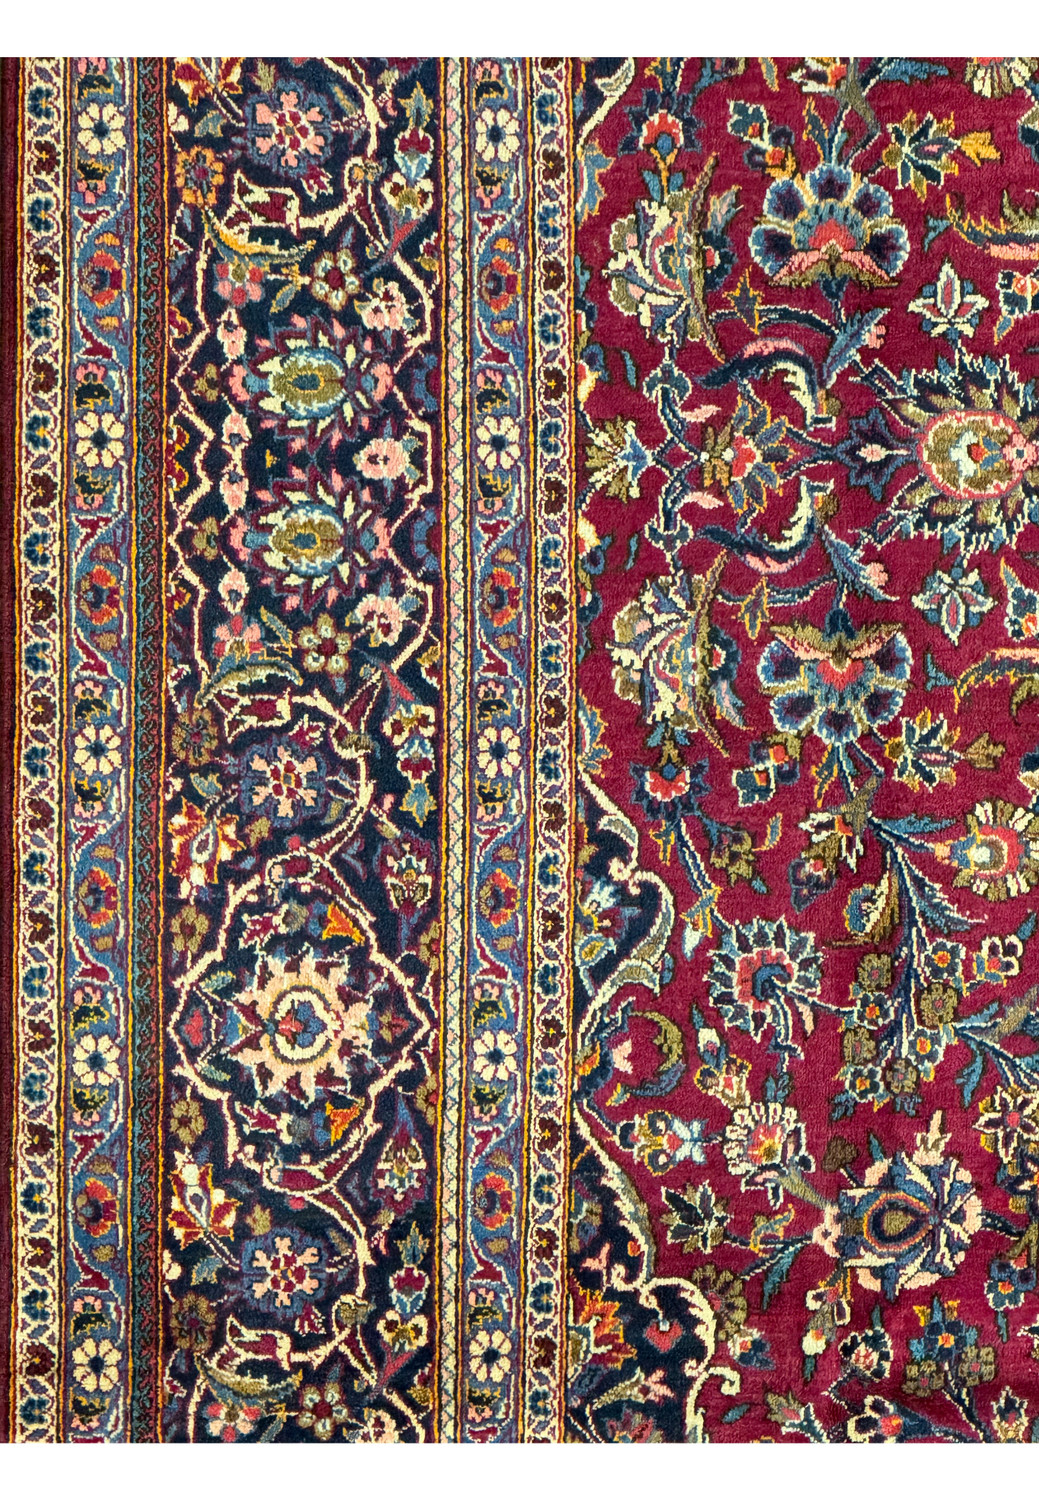 Detailed section of a Persian Kashan rug showing the exquisite border design with floral and geometric motifs.